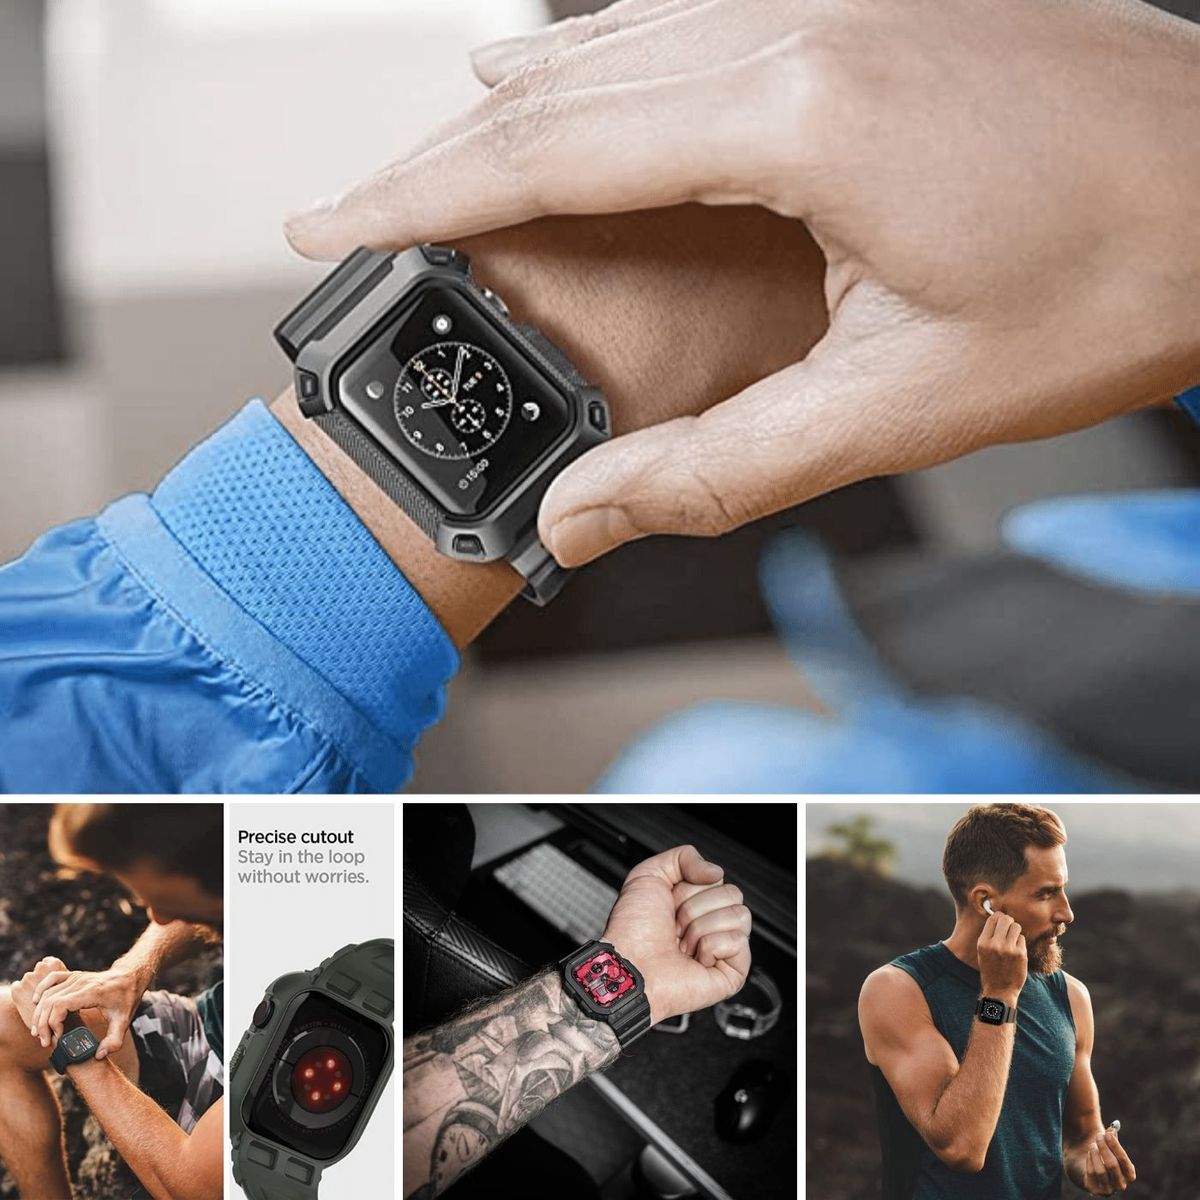 The Apple Smartwatch shown in 4 different models of Tactical Watch Bands.